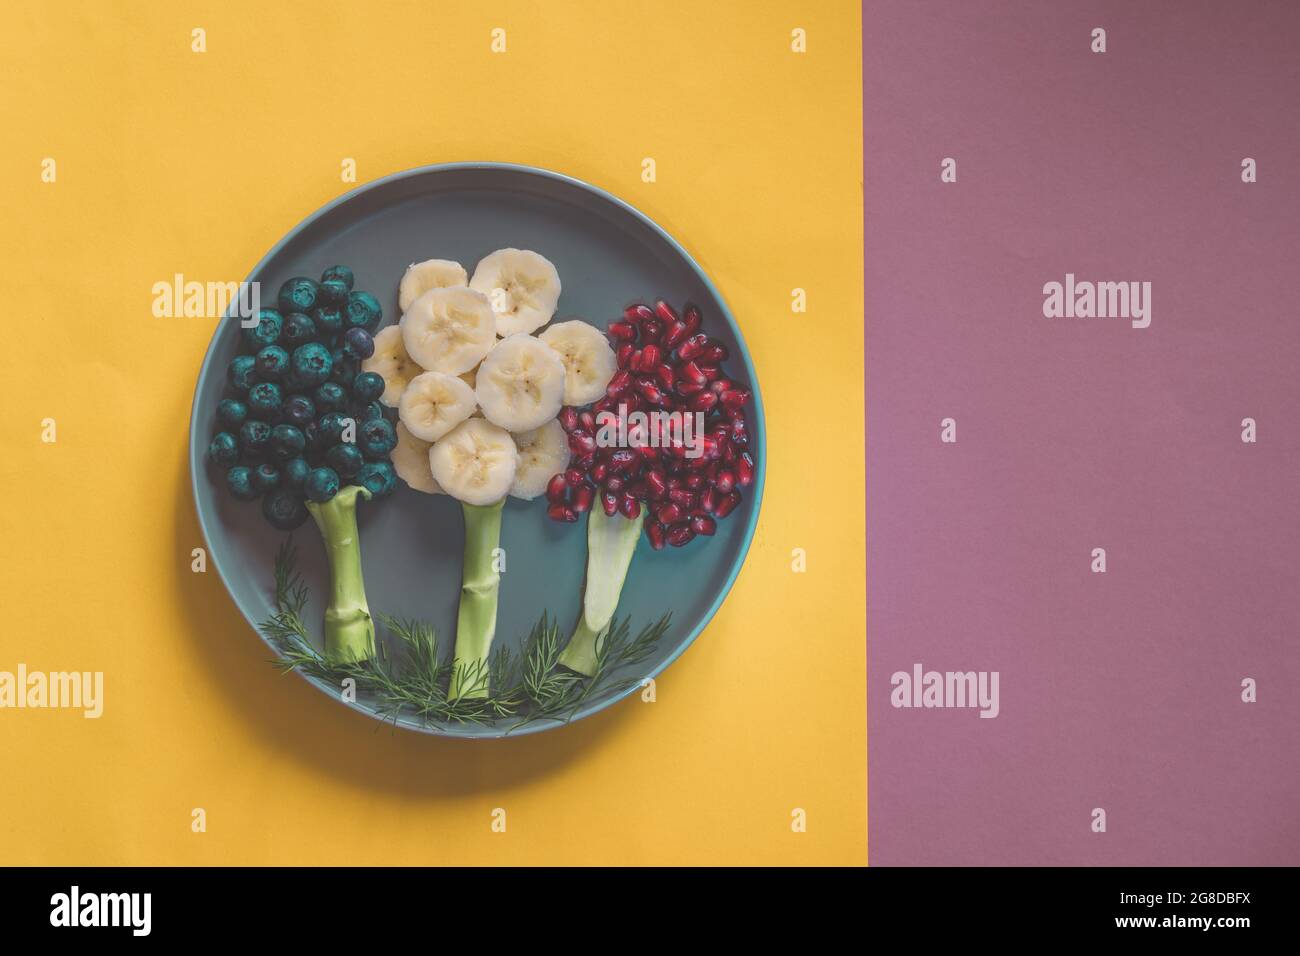 fruit trees on the plate made from banana, blueberries, pomegranate apples isolated on pink and yellow backgrounds Stock Photo